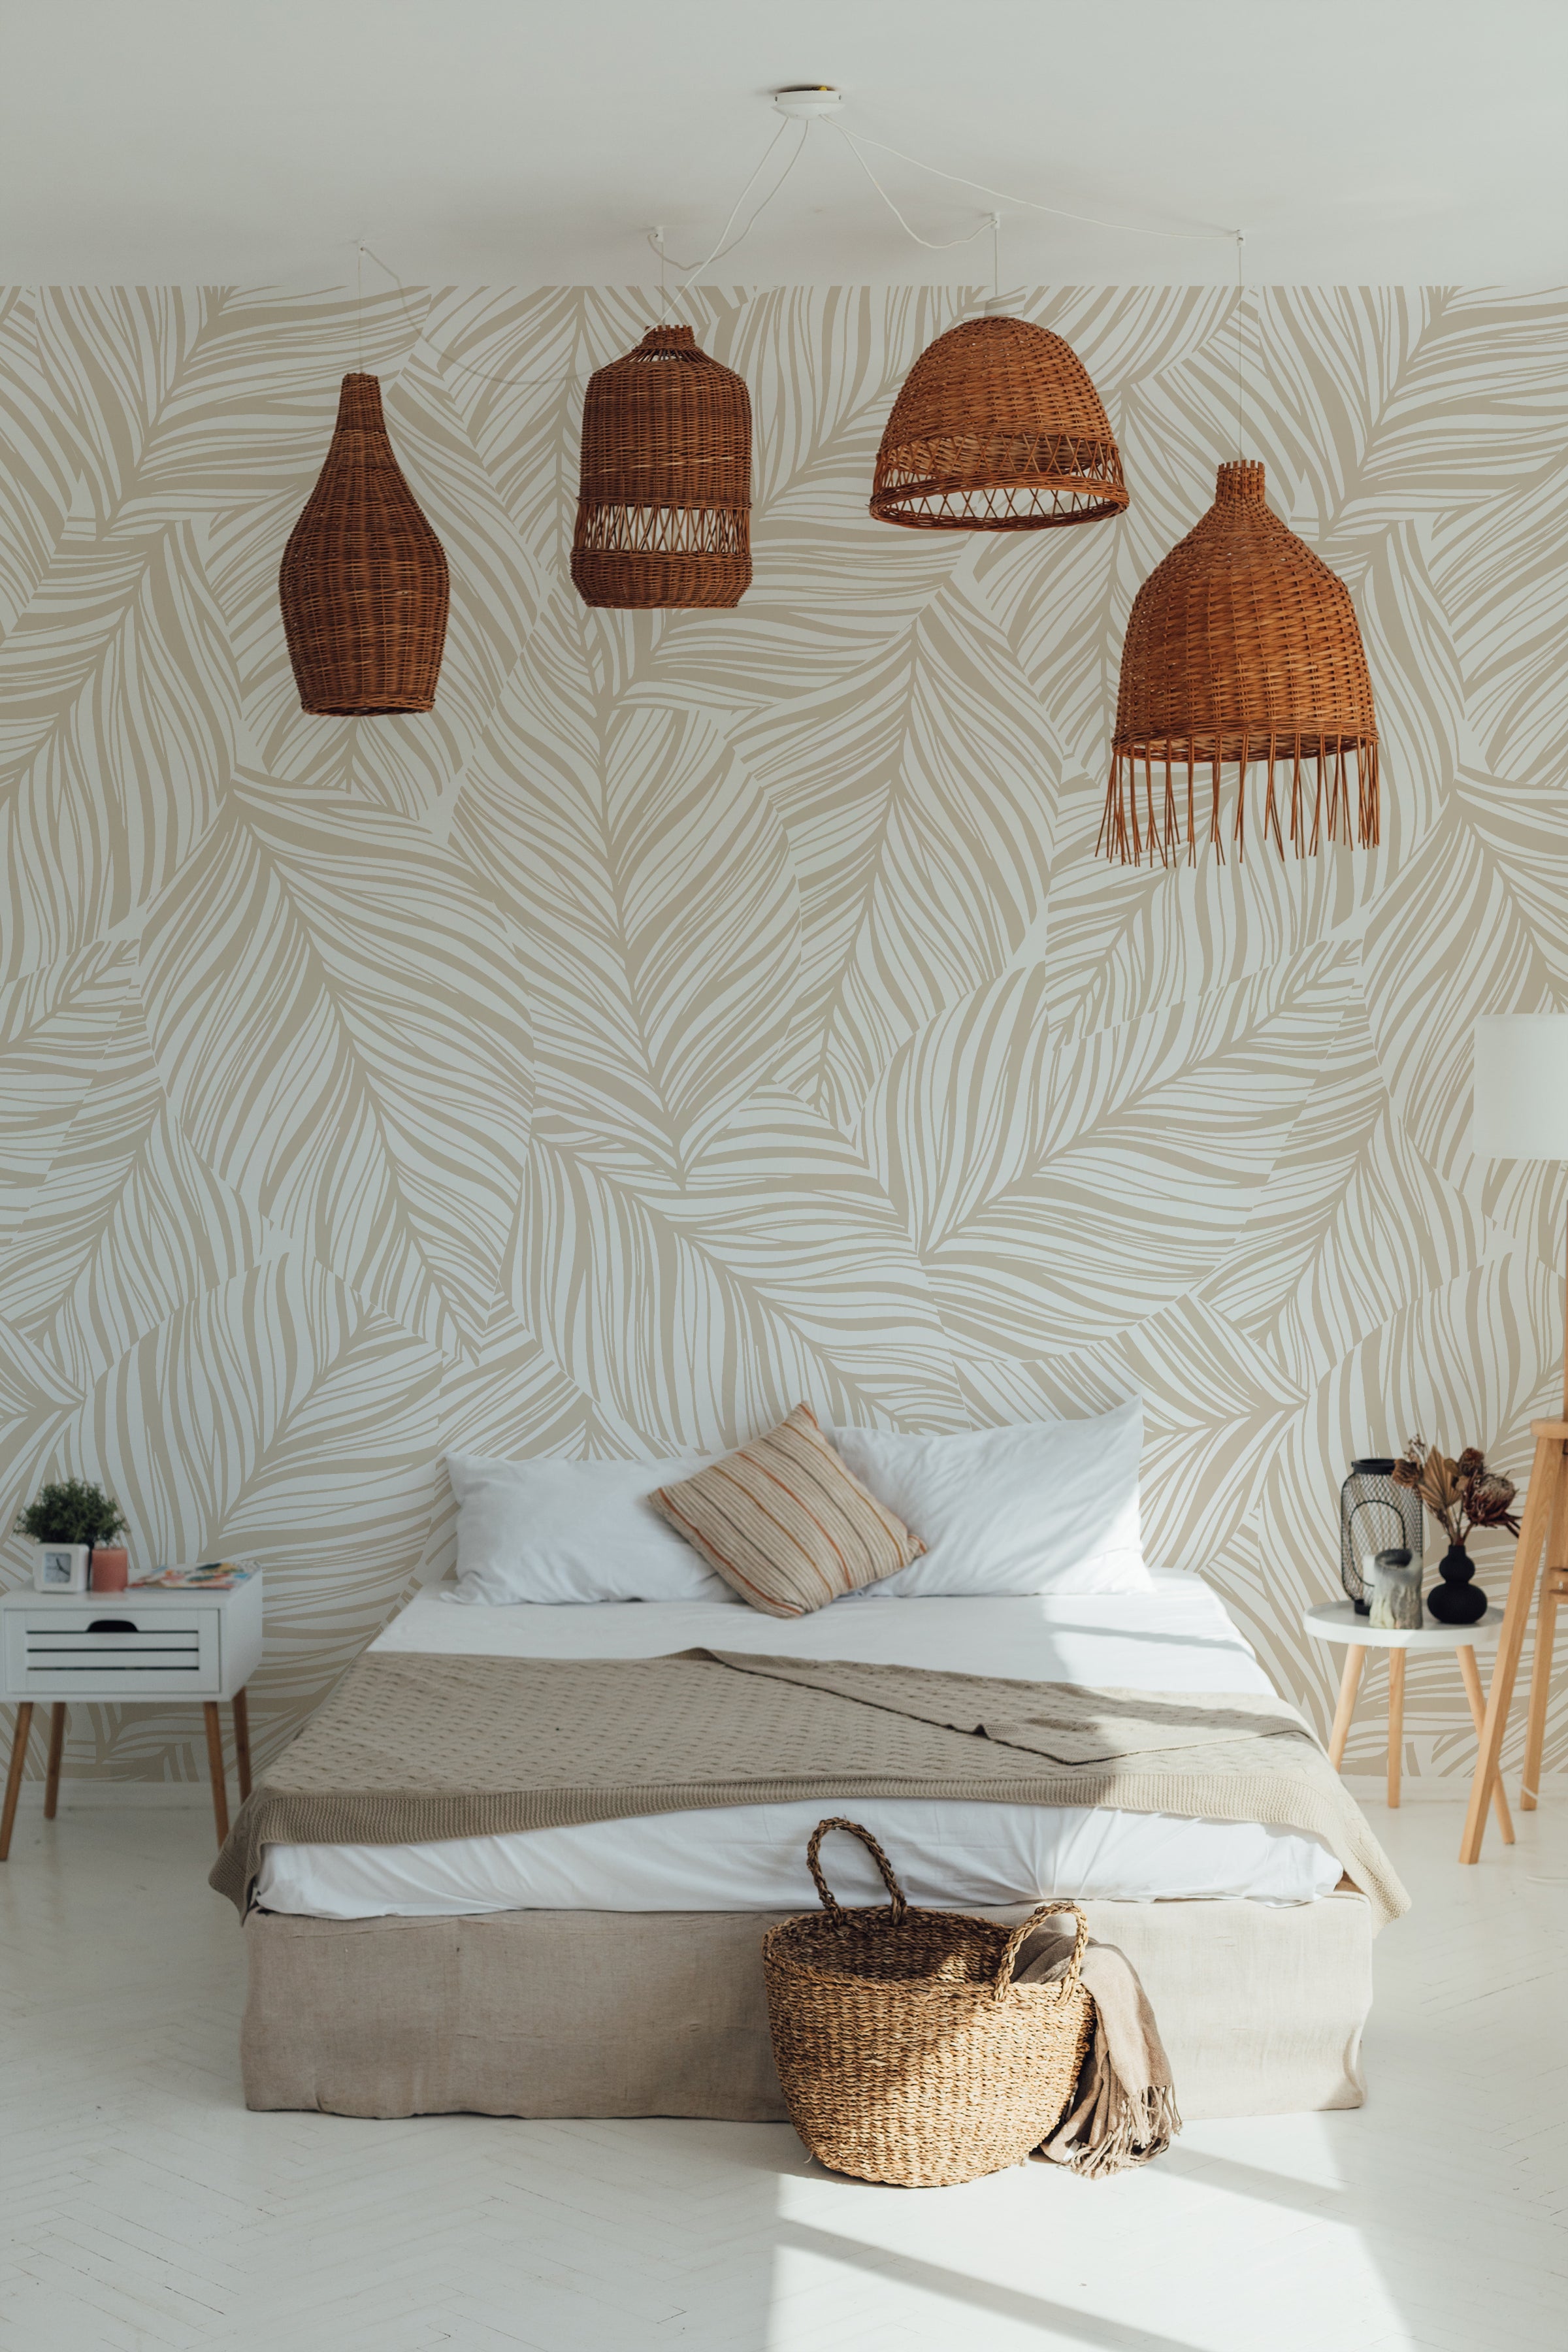 A stylish bedroom setting with Abstract Leaf Wallpaper creating a soothing backdrop. The room features a low-profile bed with simple bedding, woven rattan light fixtures above, and minimalist decor, all harmonizing with the leafy wallpaper to evoke a calm and serene environment.